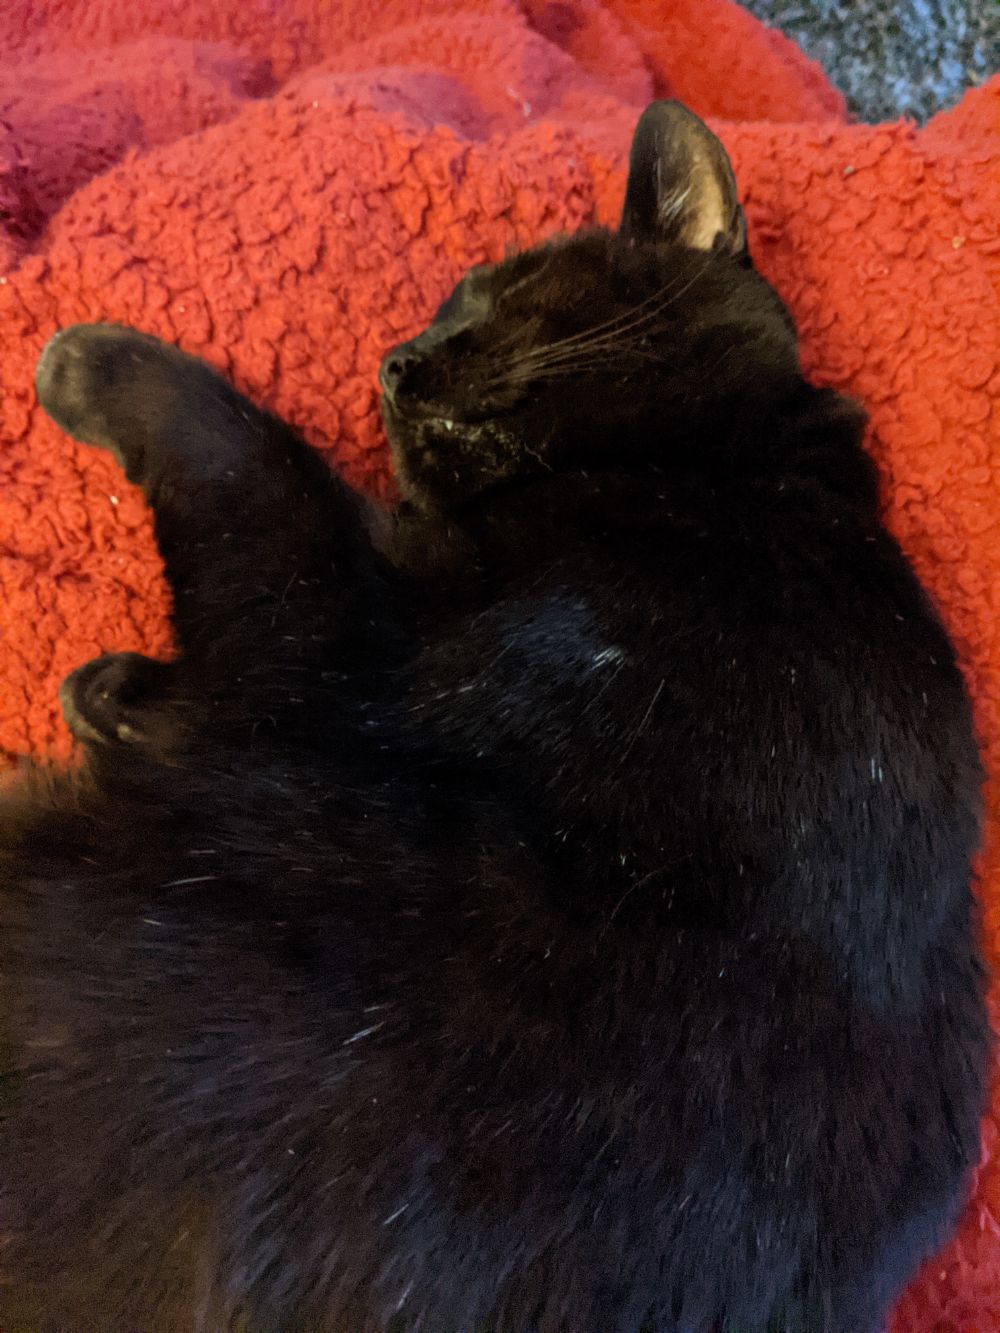 Black cat lying on his side, on a red blanket, on Jamie's lap